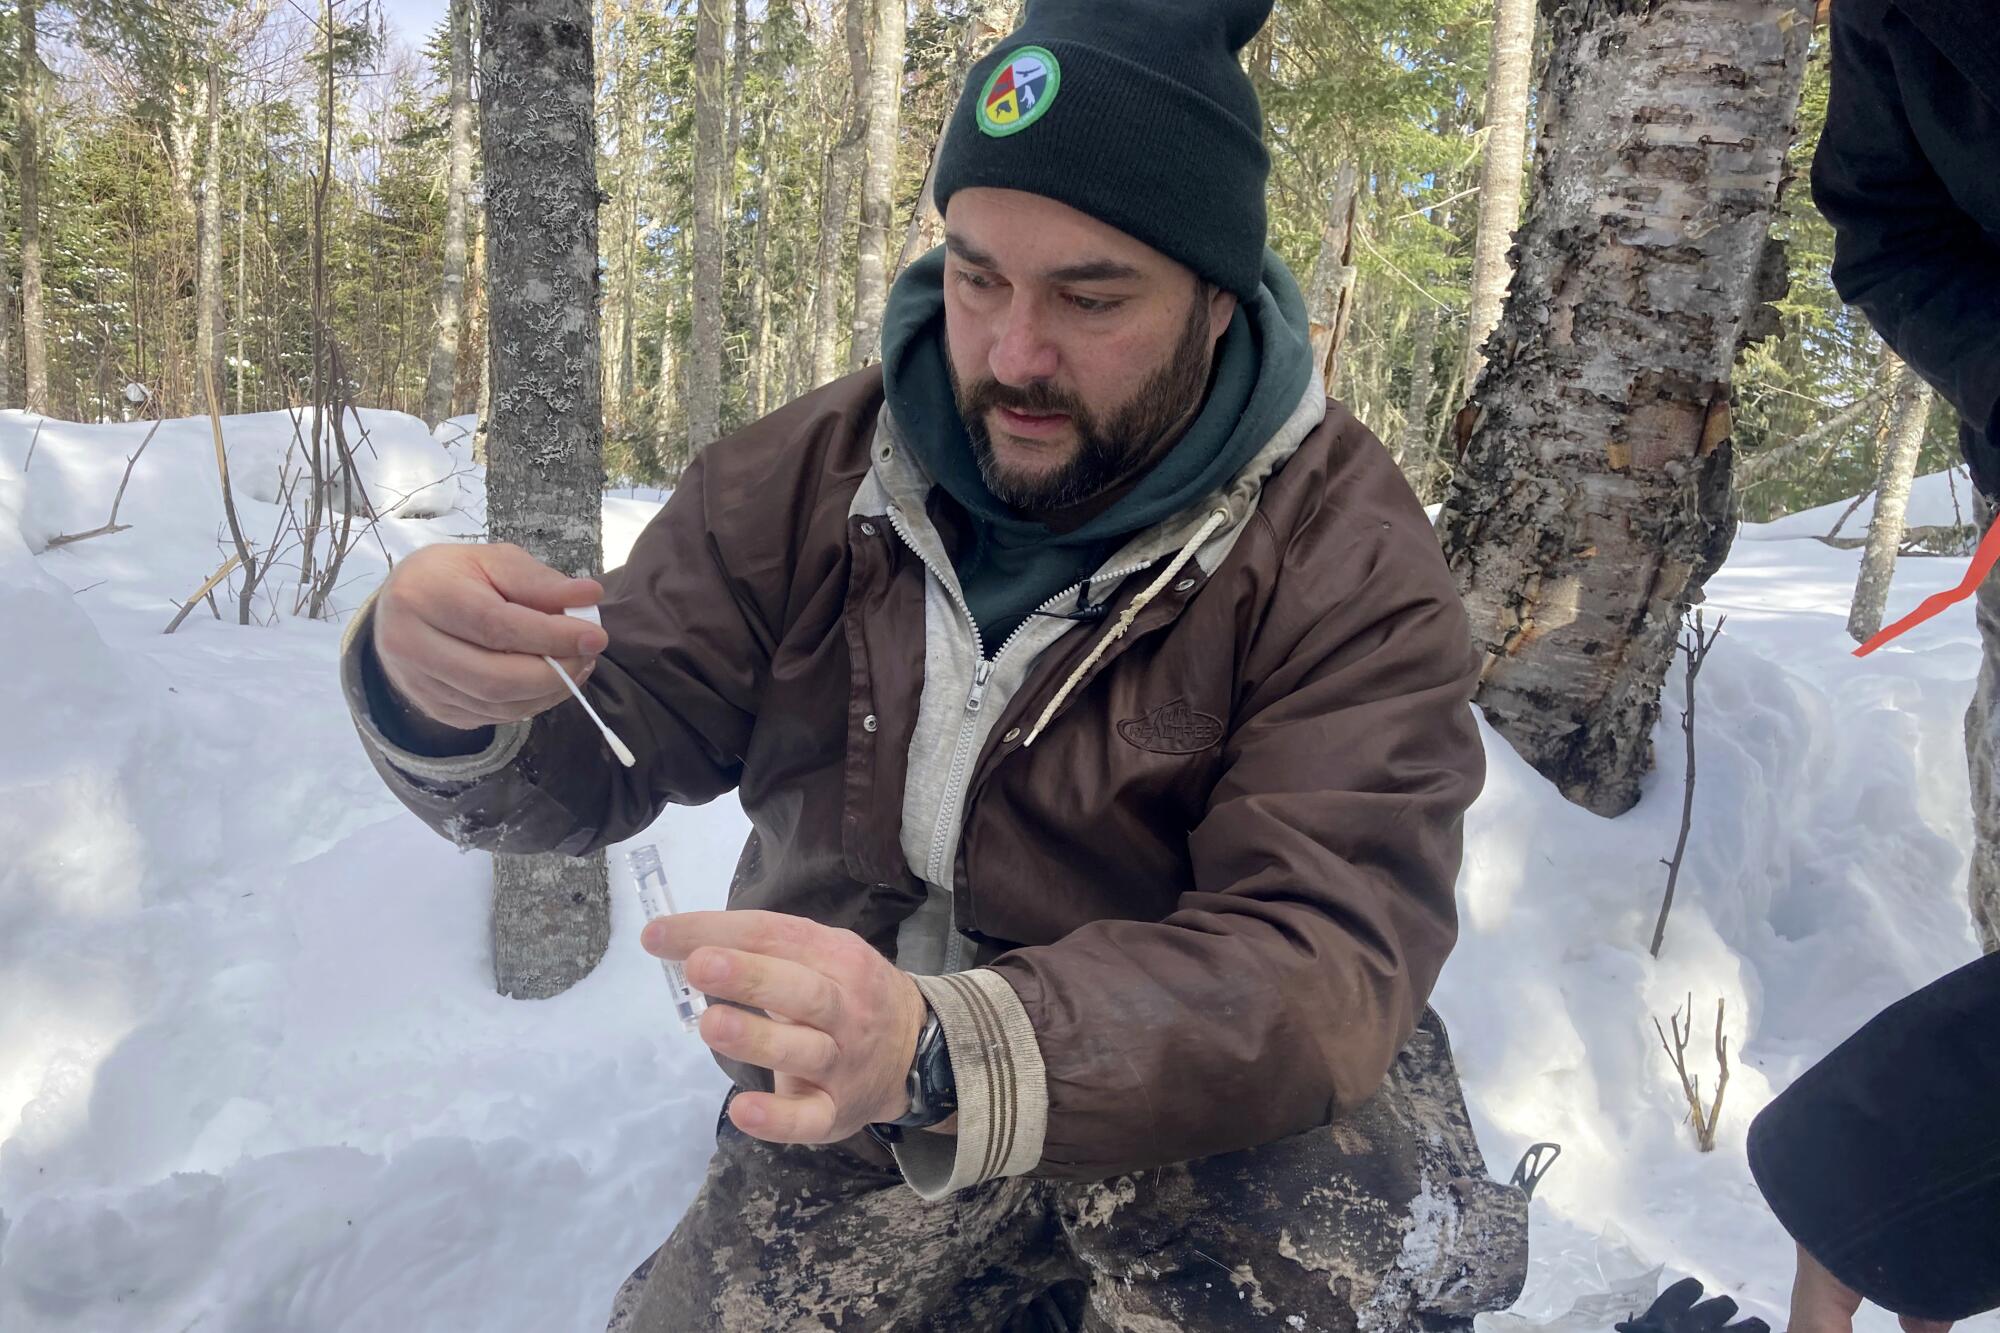 A man in snowy woods places a sample swab into a vial while testing a young deer for the coronavirus.